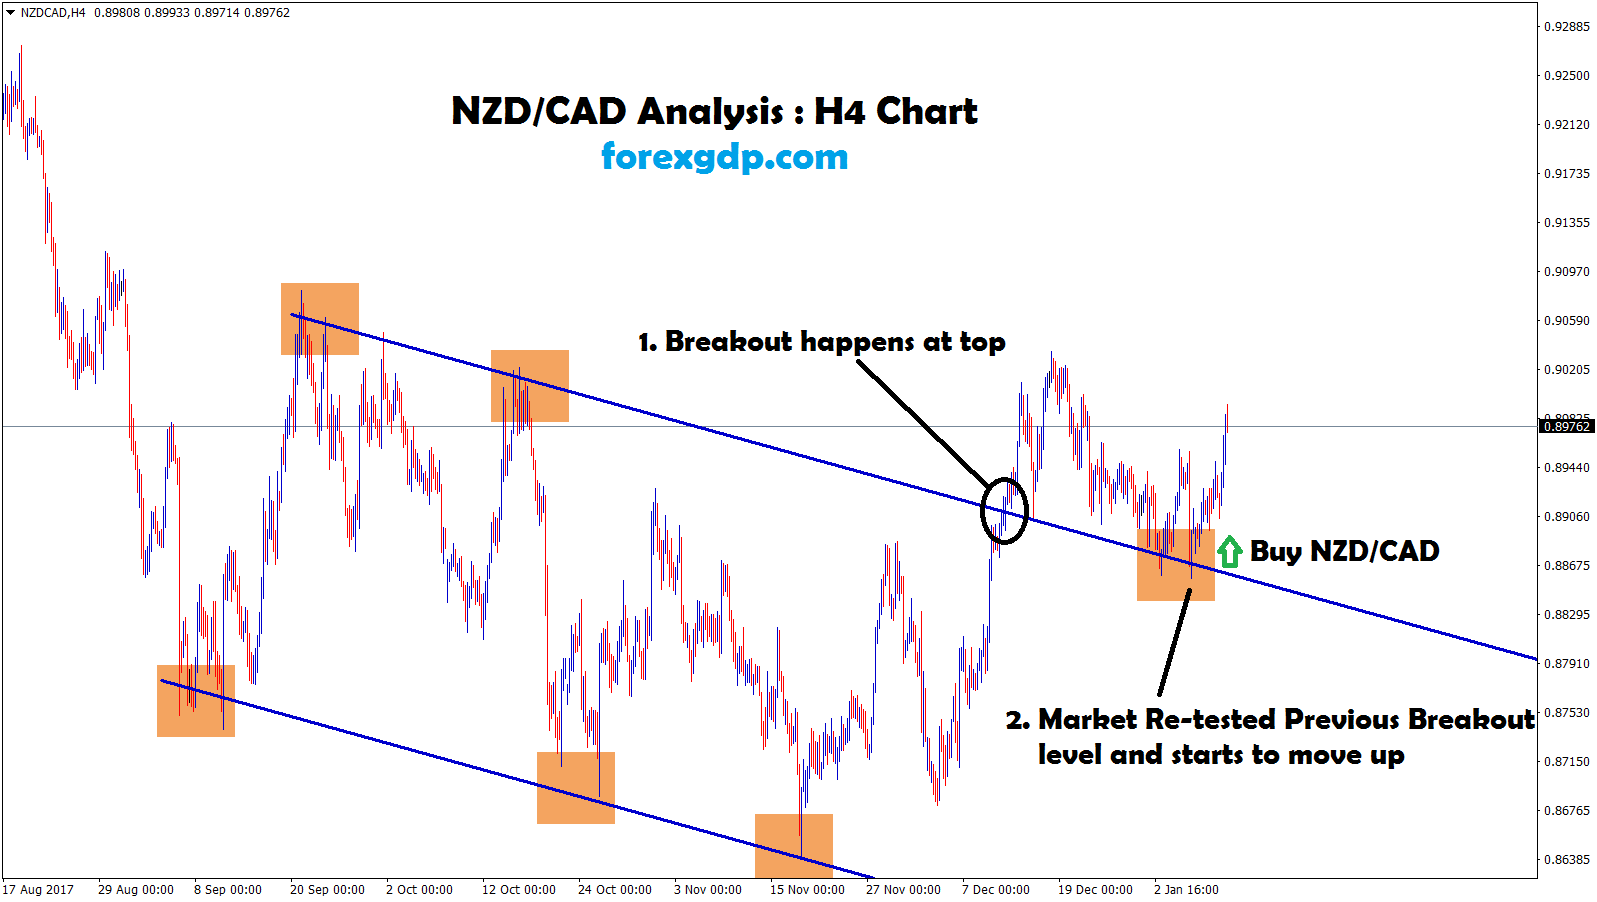 nzd cad re-tested the previous breakout level